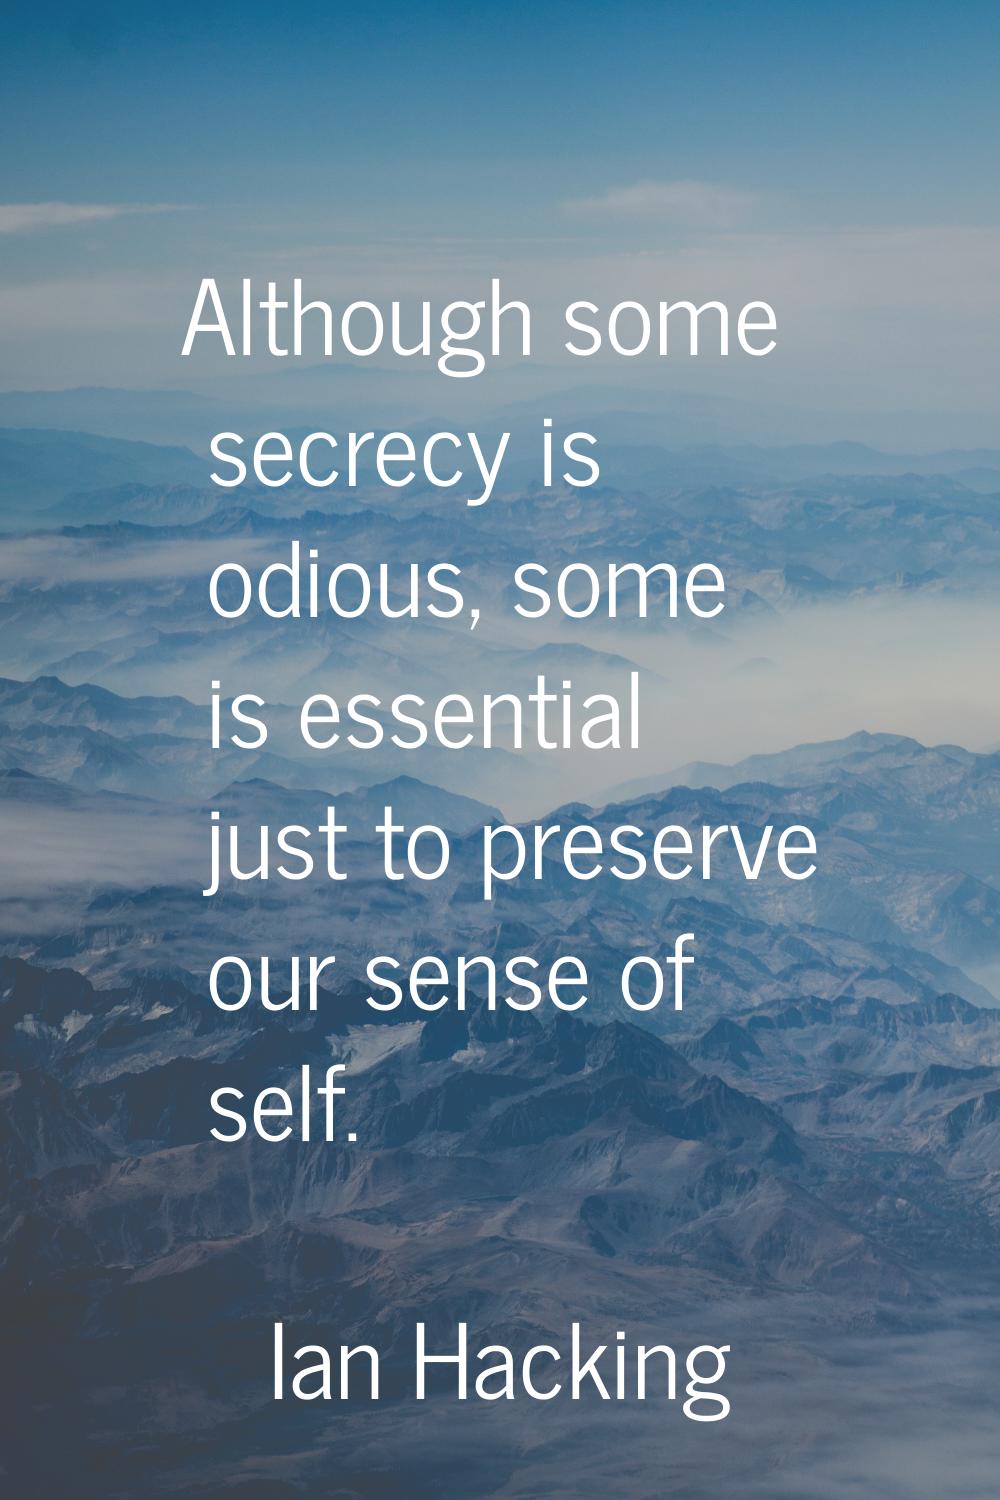 Although some secrecy is odious, some is essential just to preserve our sense of self.